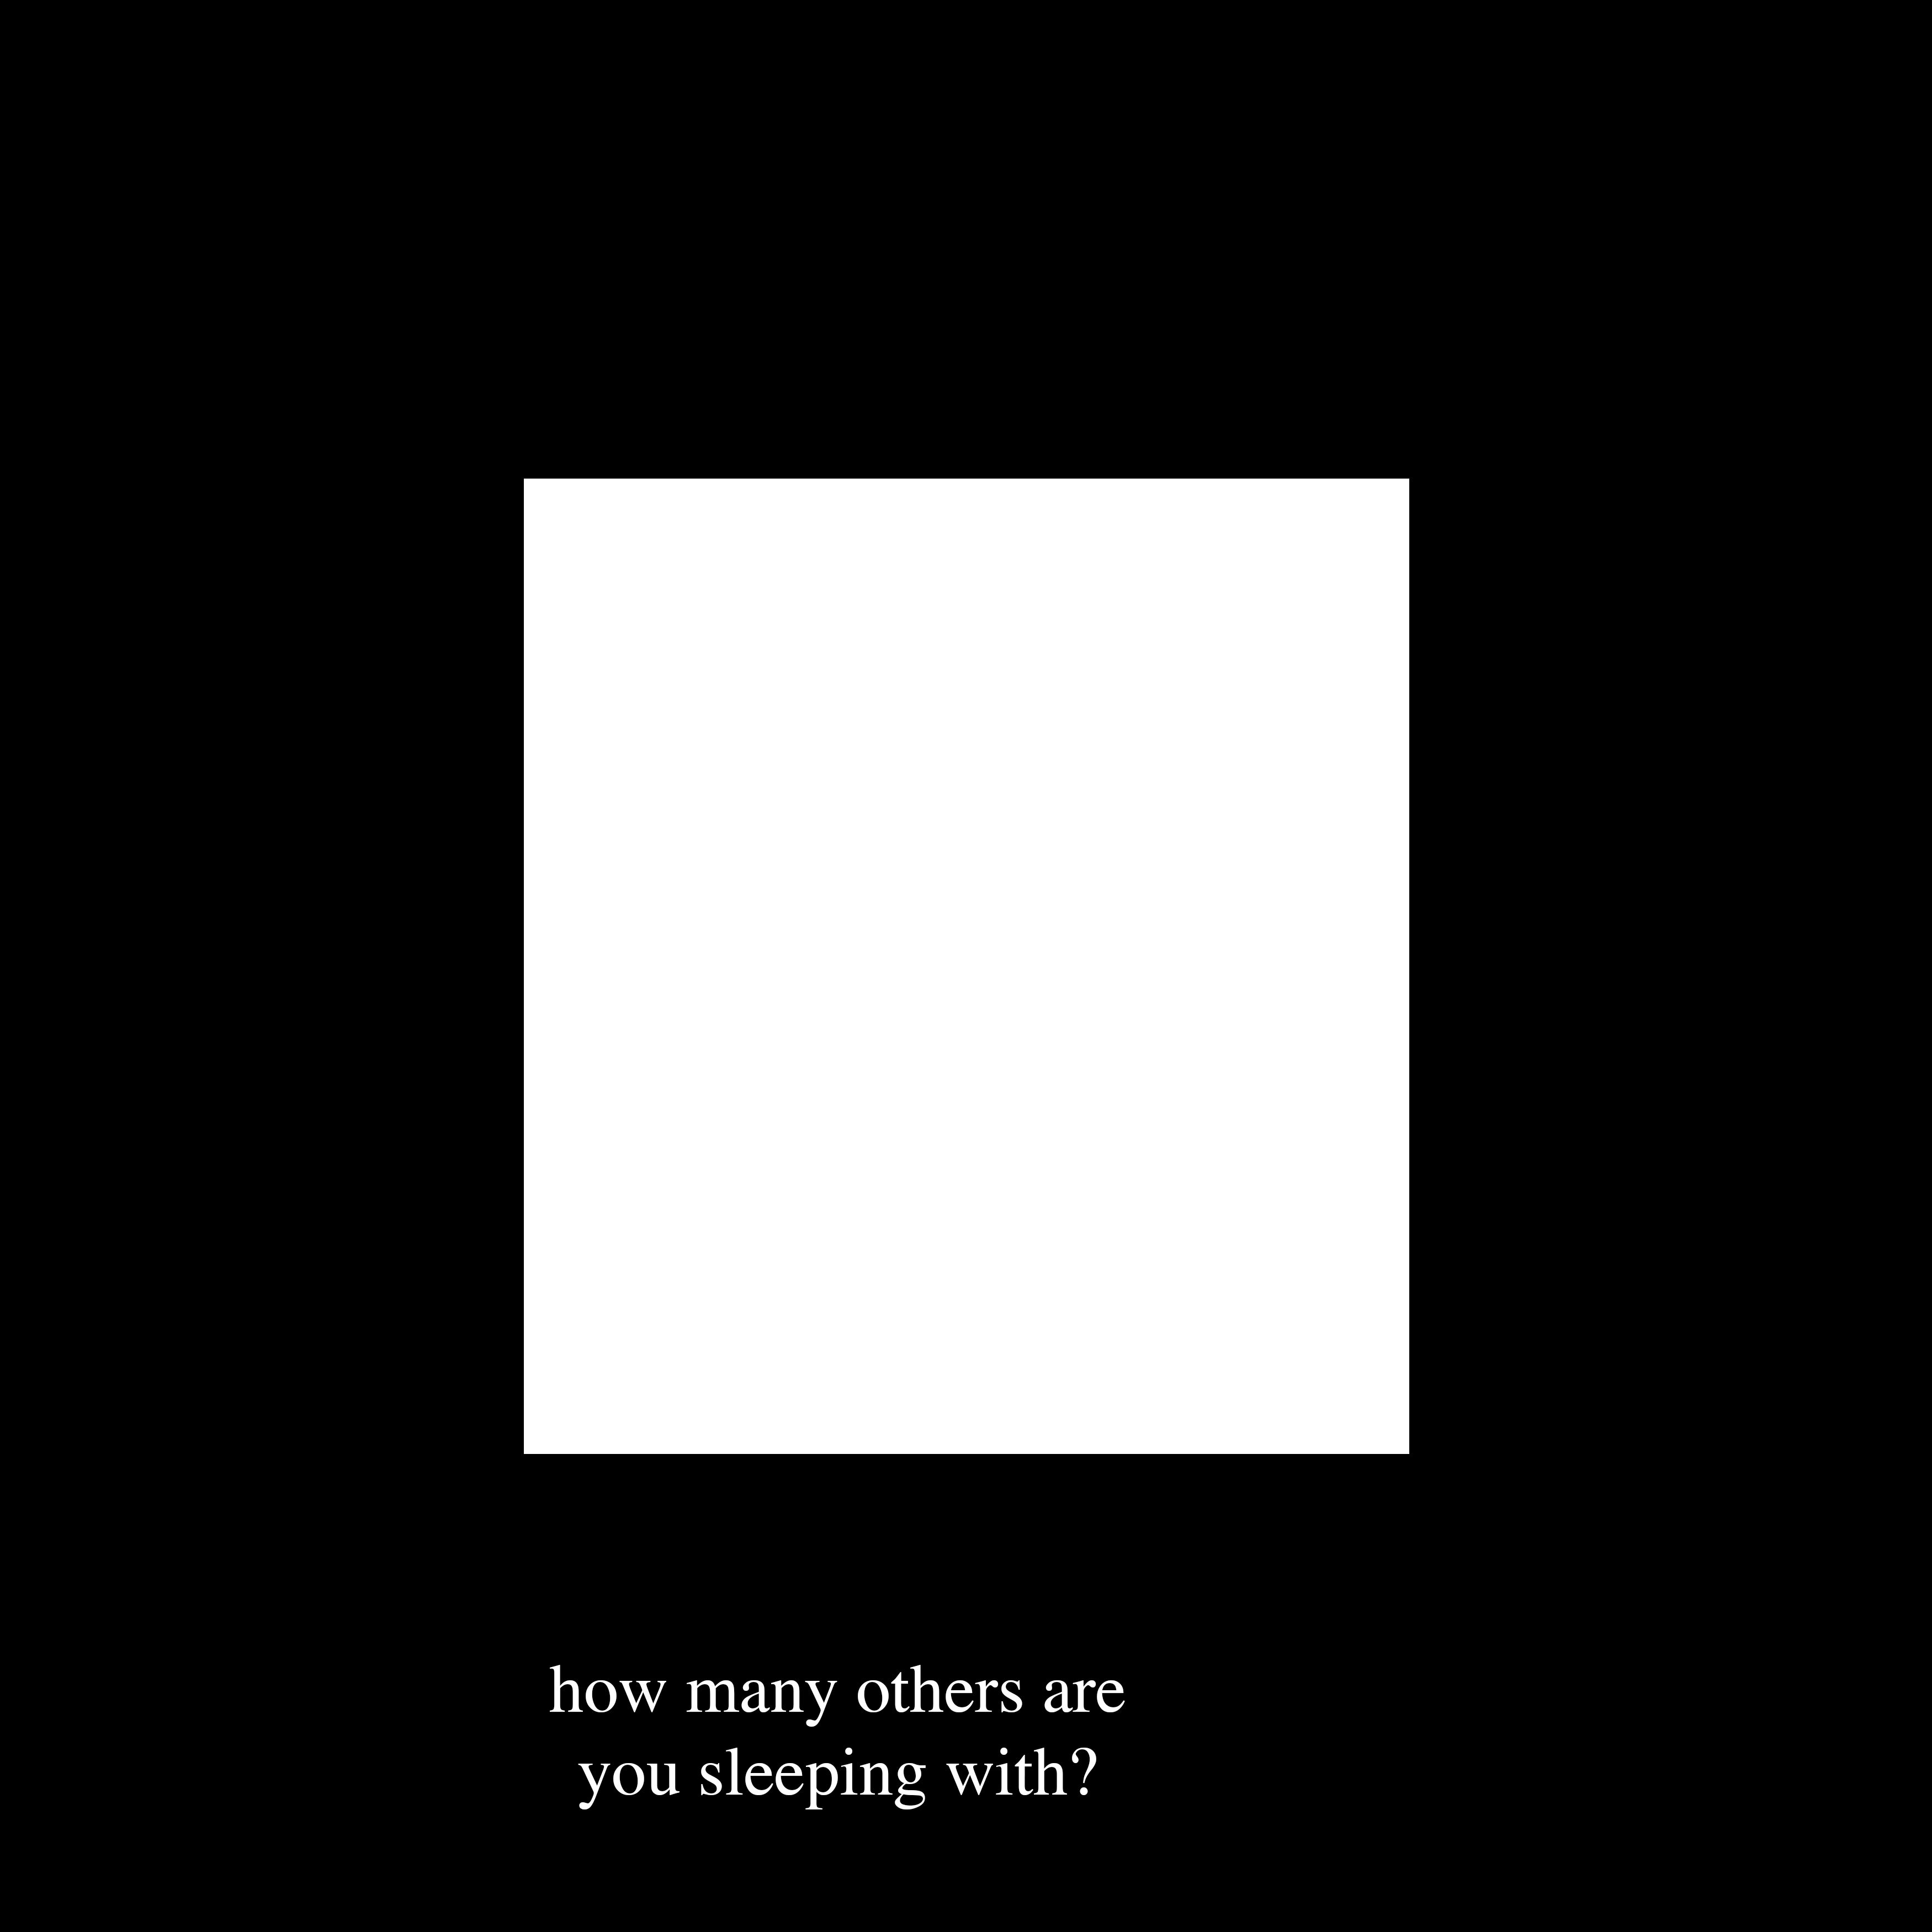 Stiahnuť ▼ how many others are you sleeping with? demo